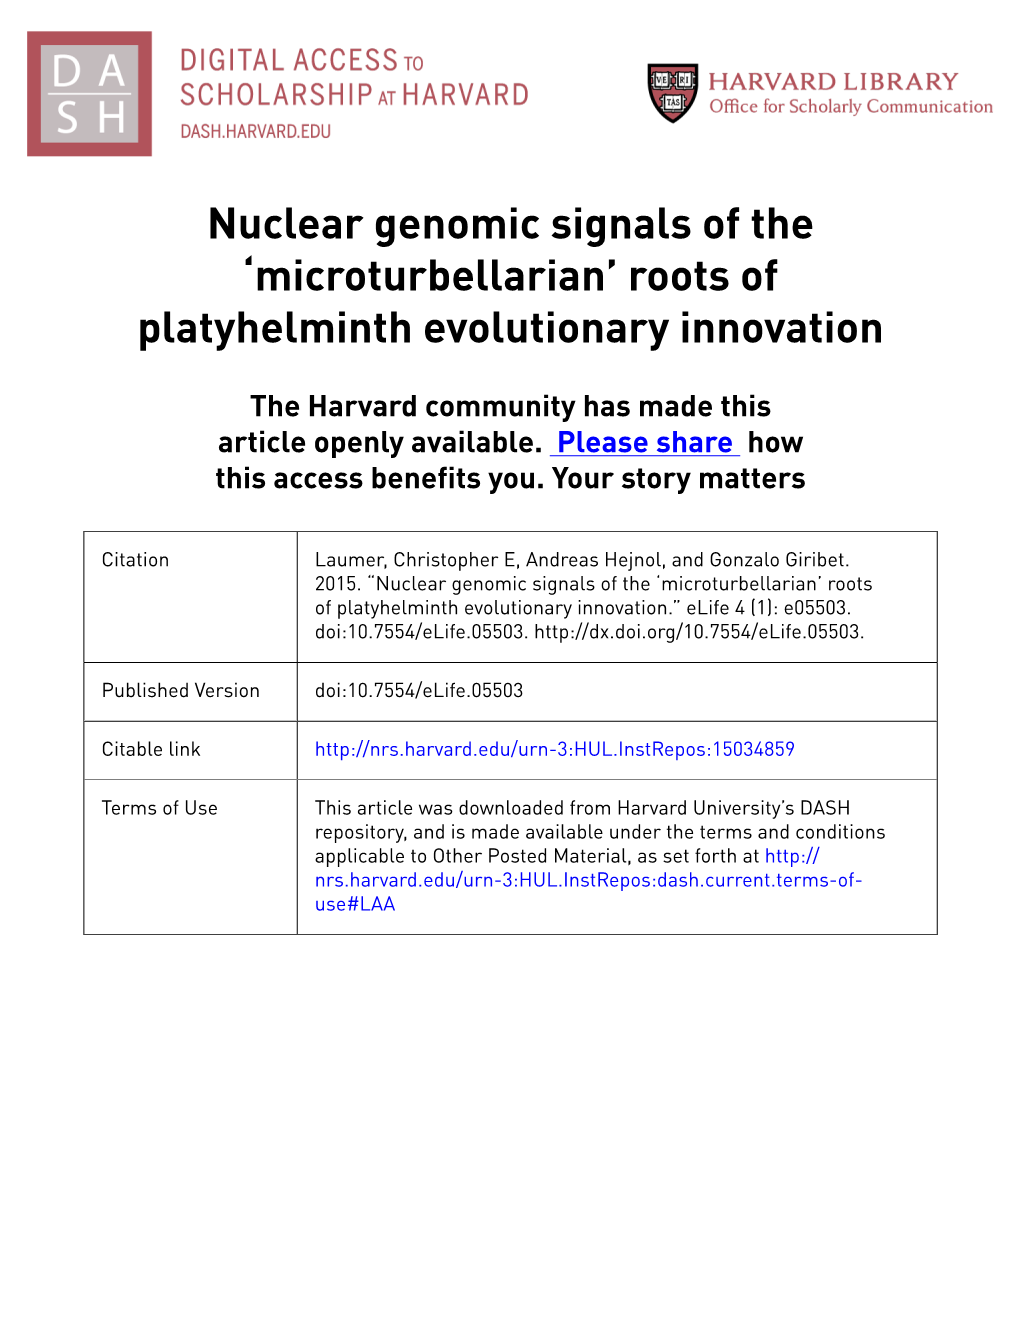 Nuclear Genomic Signals of the ‘Microturbellarian’ Roots of Platyhelminth Evolutionary Innovation